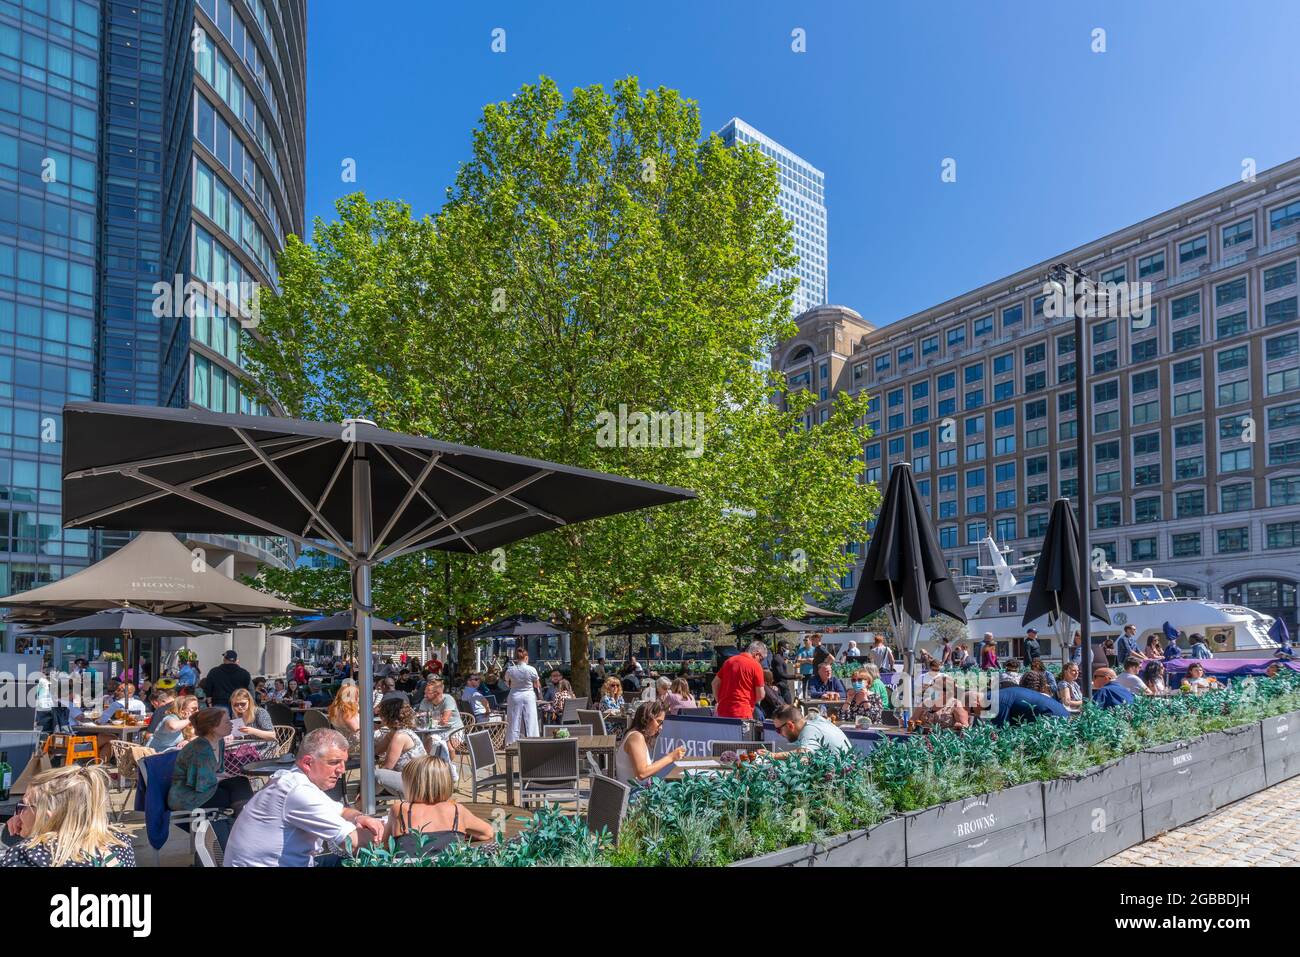 View of alfresco eating in Canary Wharf, Docklands, London, England, United Kingdom, Europe Stock Photo